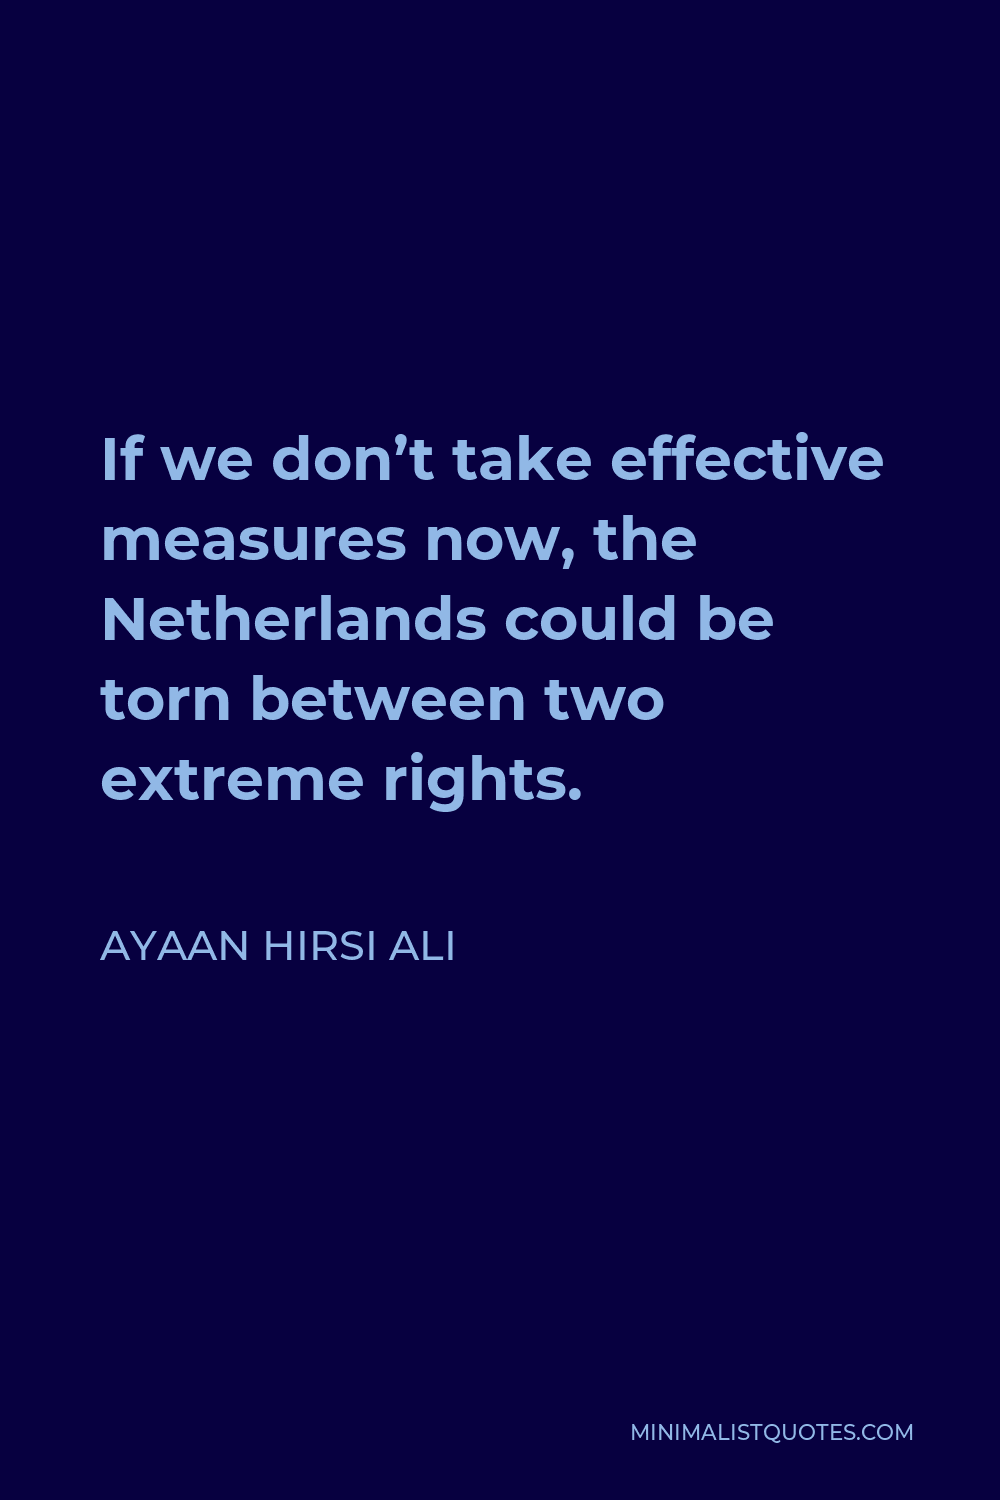 Ayaan Hirsi Ali Quote - If we don’t take effective measures now, the Netherlands could be torn between two extreme rights.